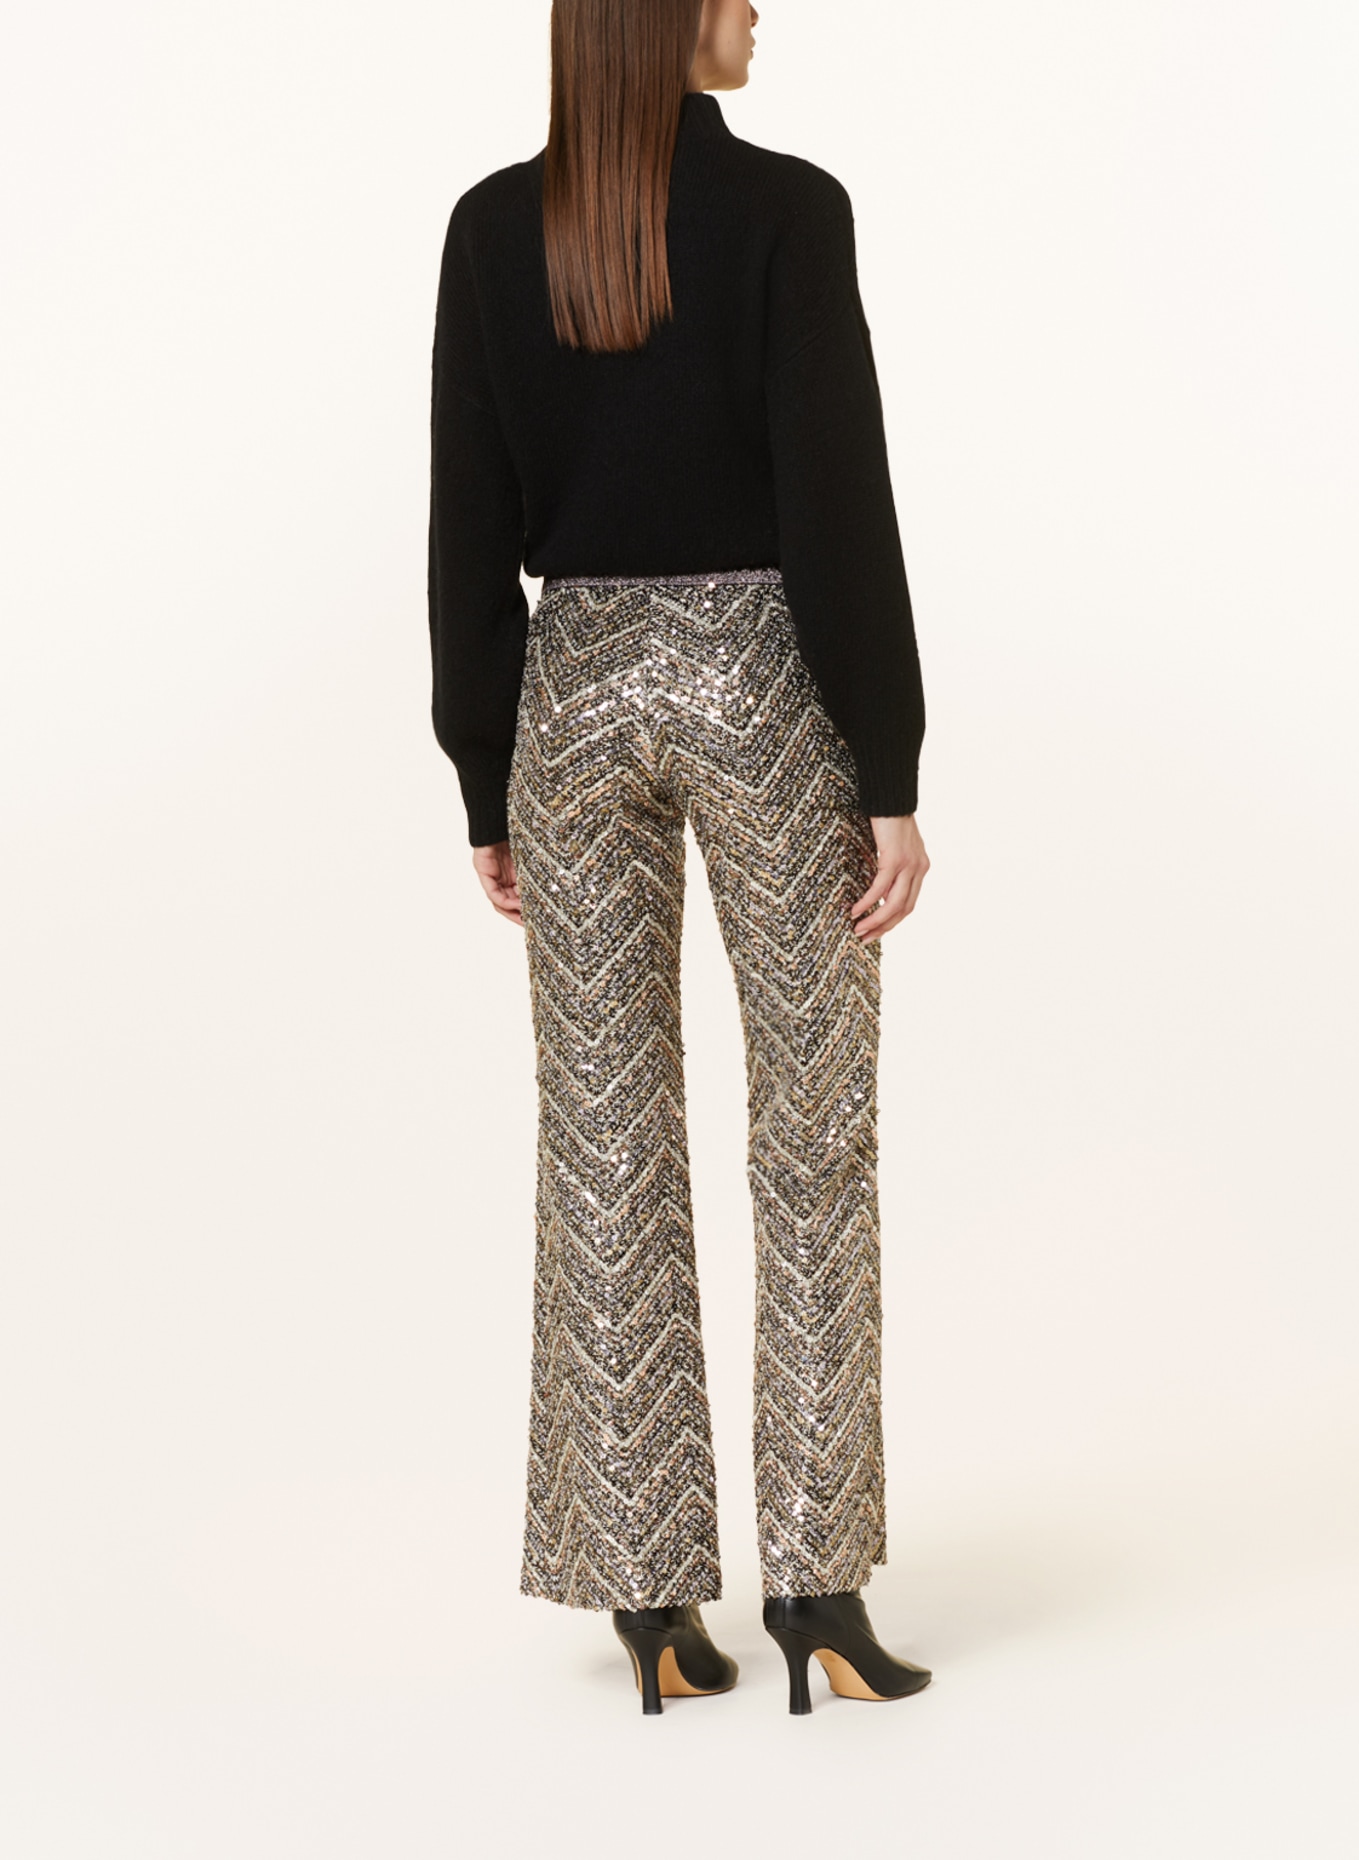 CAMBIO Trousers FRANCIS with sequins, Color: BLACK/ CREAM/ GOLD (Image 3)